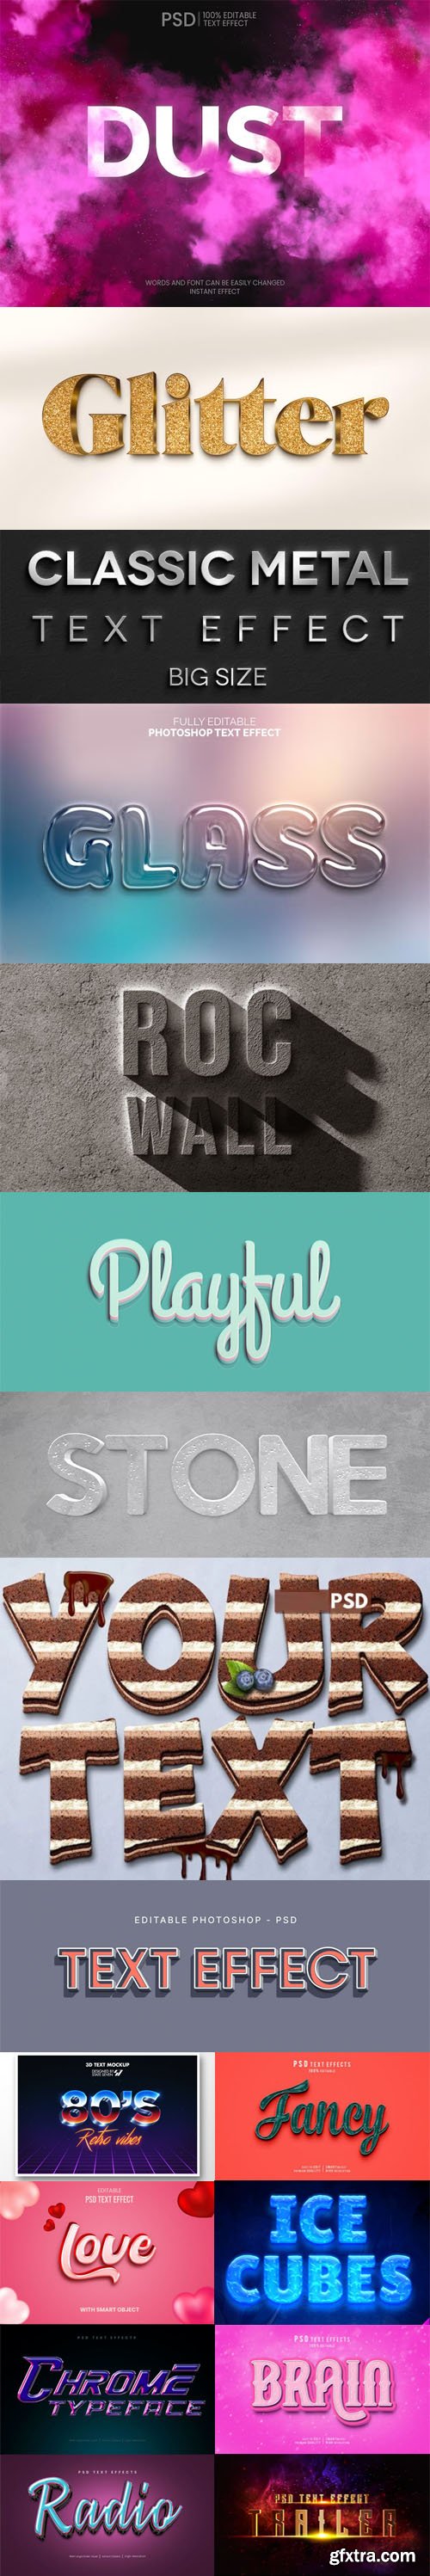 Collection of Text Effects for Photoshop [Vol.1]